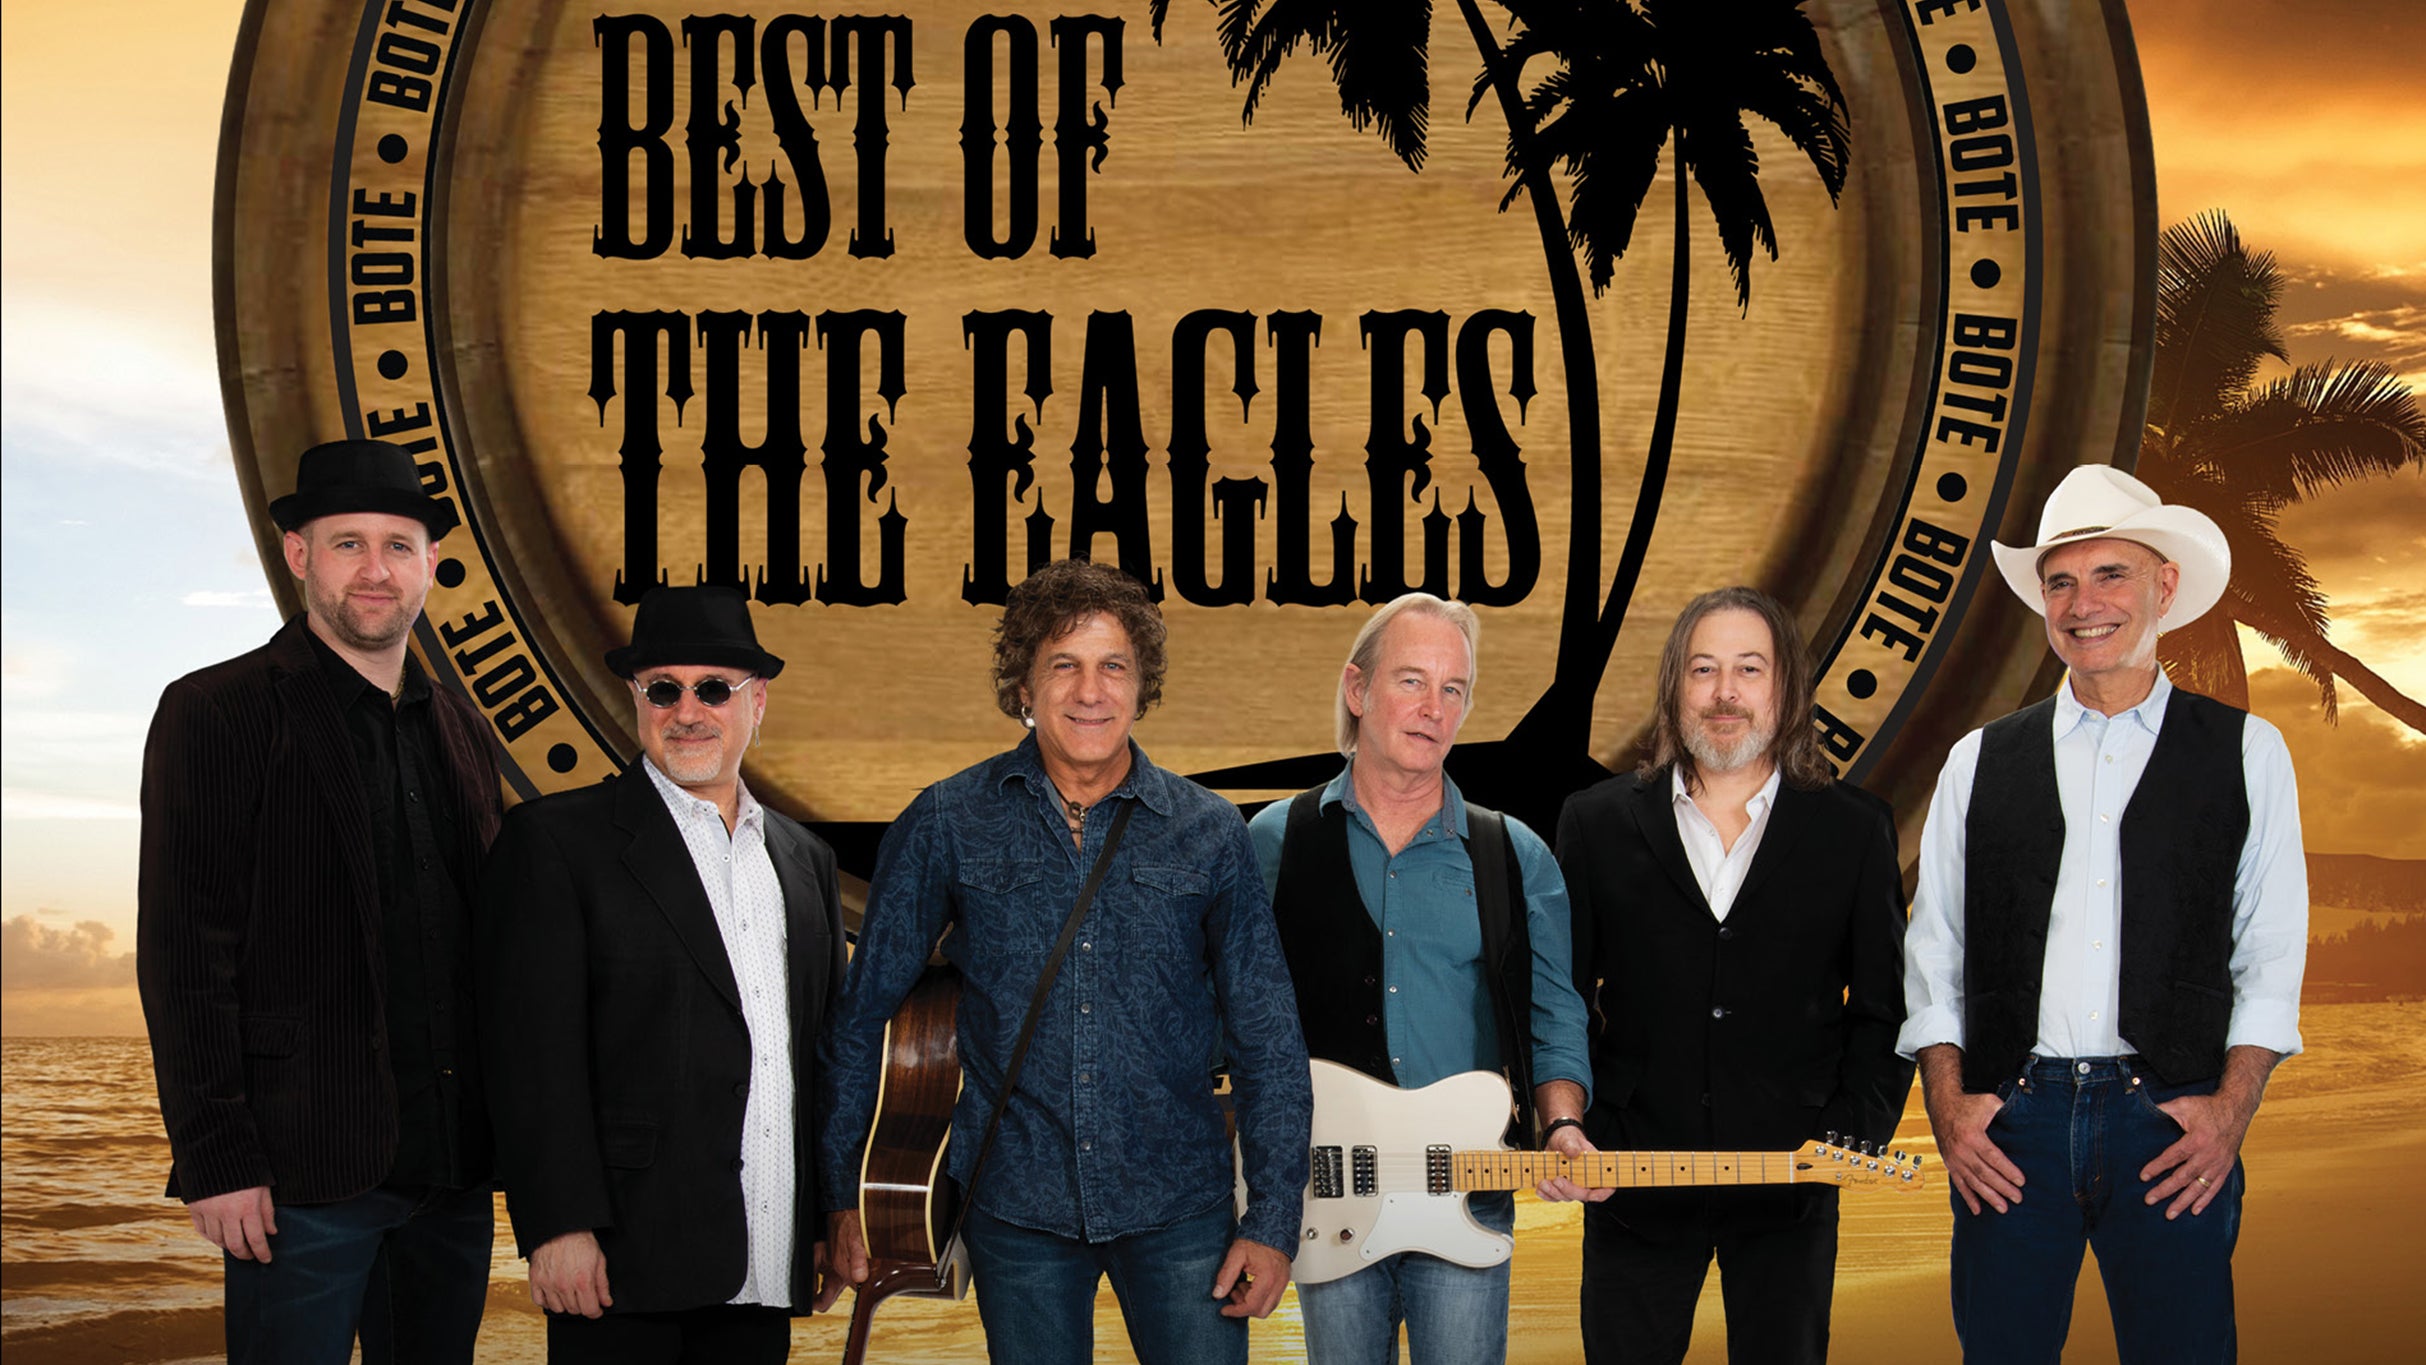 The Best of The Eagles presale password